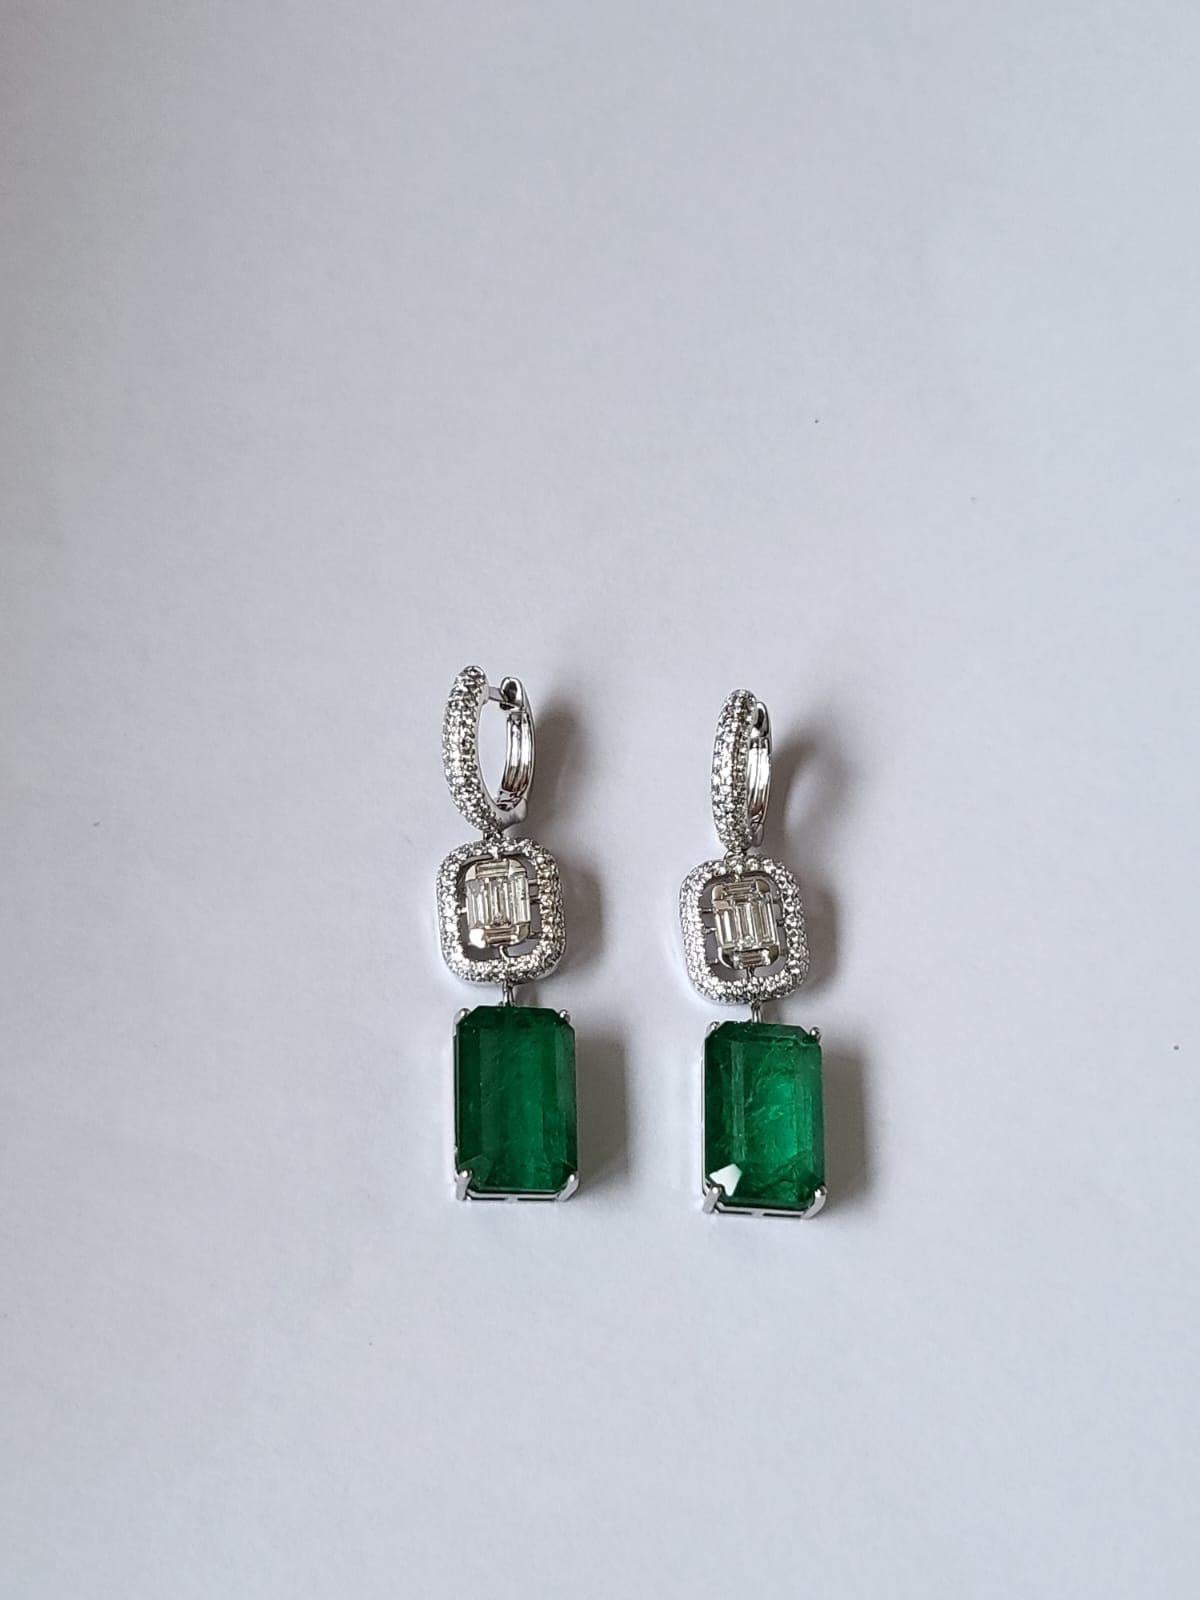 A very beautiful and useful, Emerald Dangle Earring set in 18K Rose Gold & Diamonds. The weight of the Emeralds is 17.57 carats. The combined weight of the Diamonds is 17.57 carats. The Emeralds are completely natural, without any treatment and is